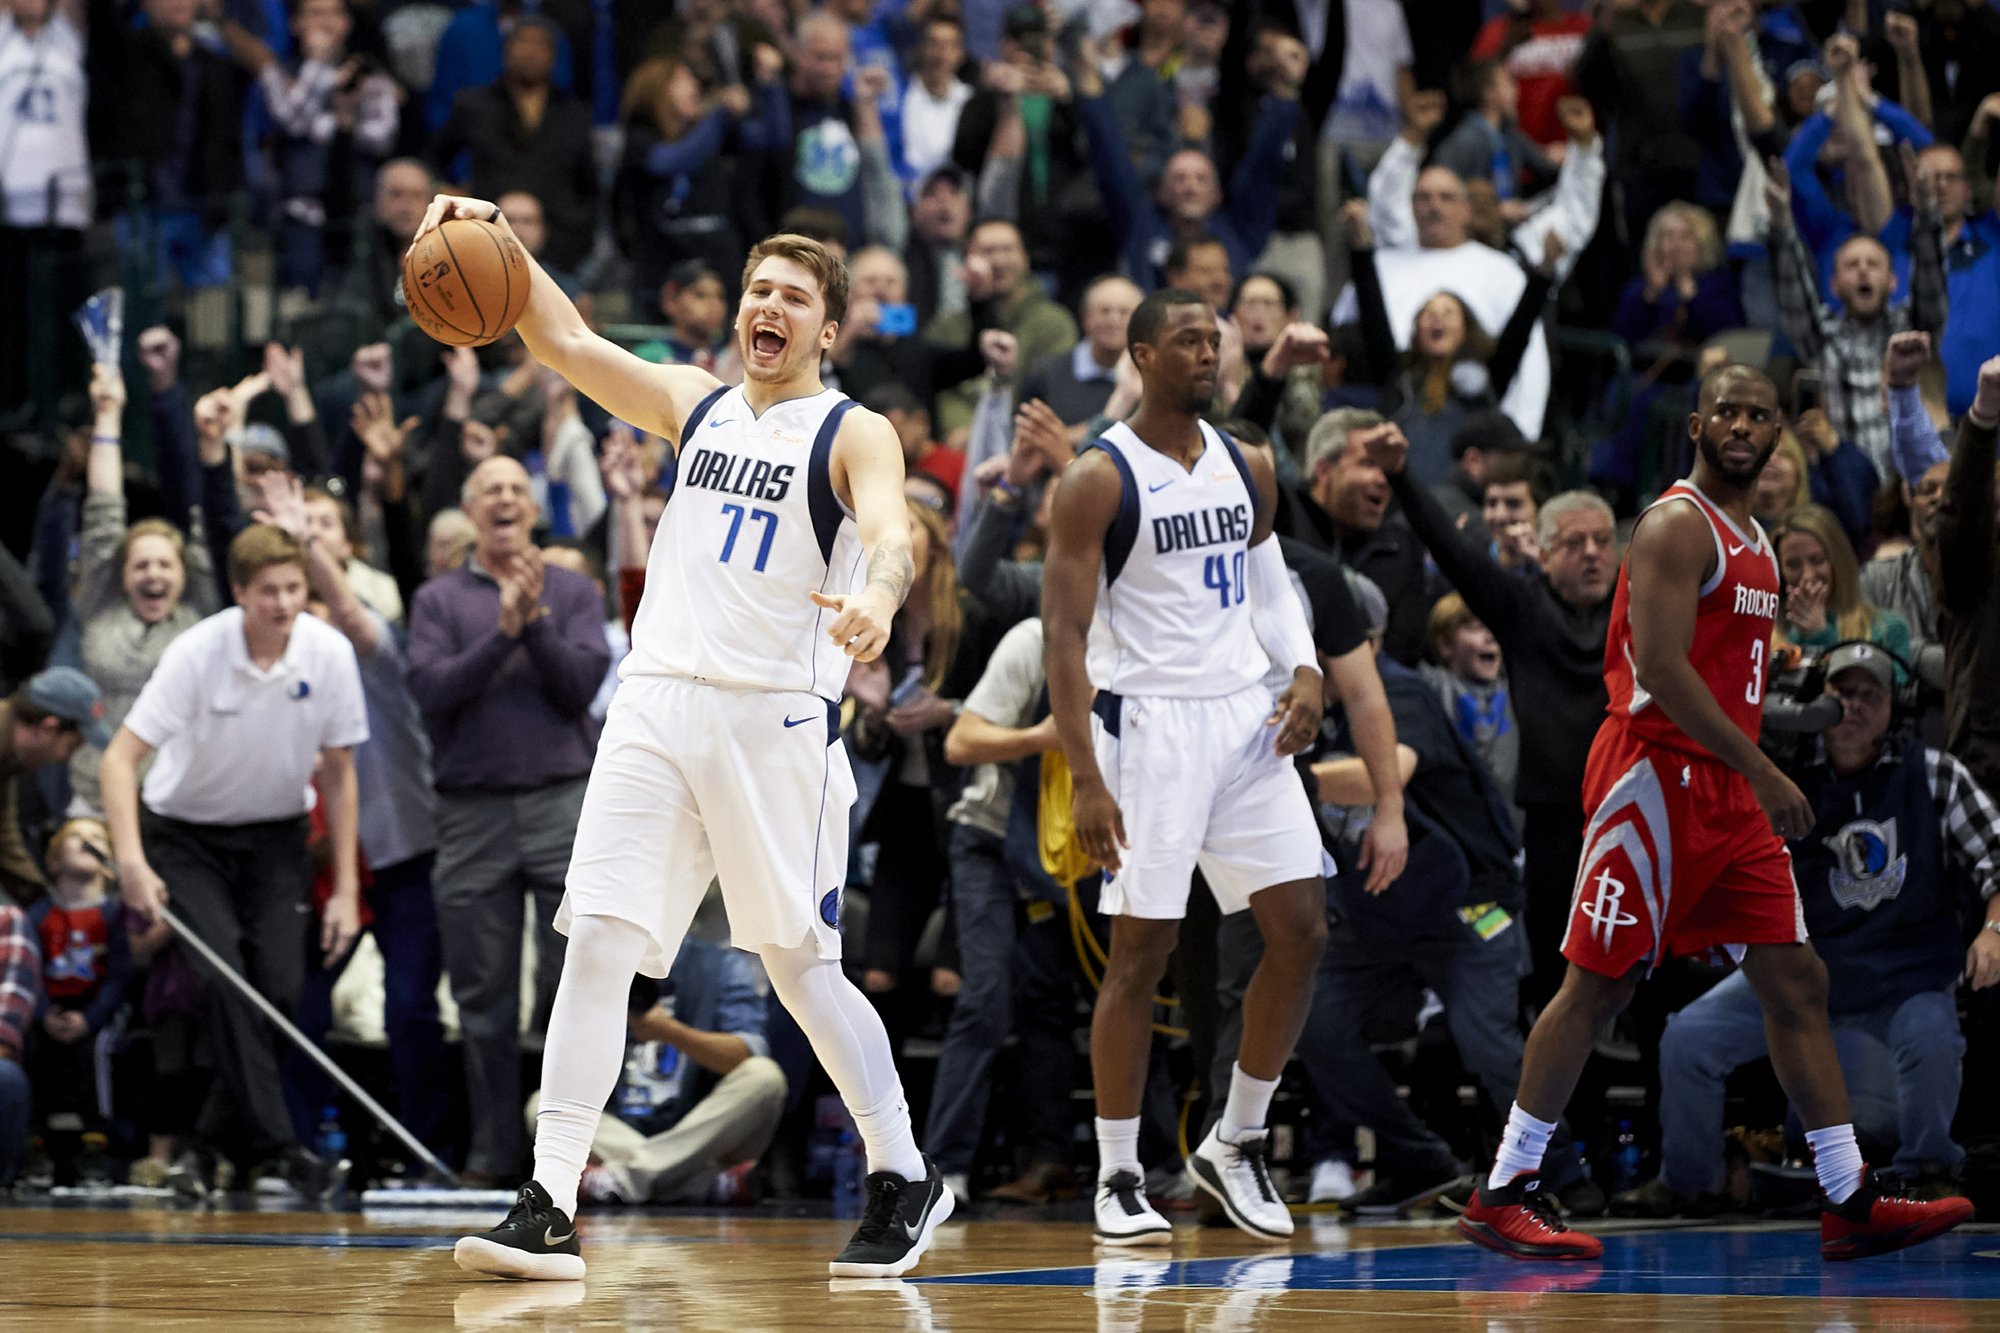 Doncic scores 11 straight, Mavs rally past Rockets | Inquirer Sports